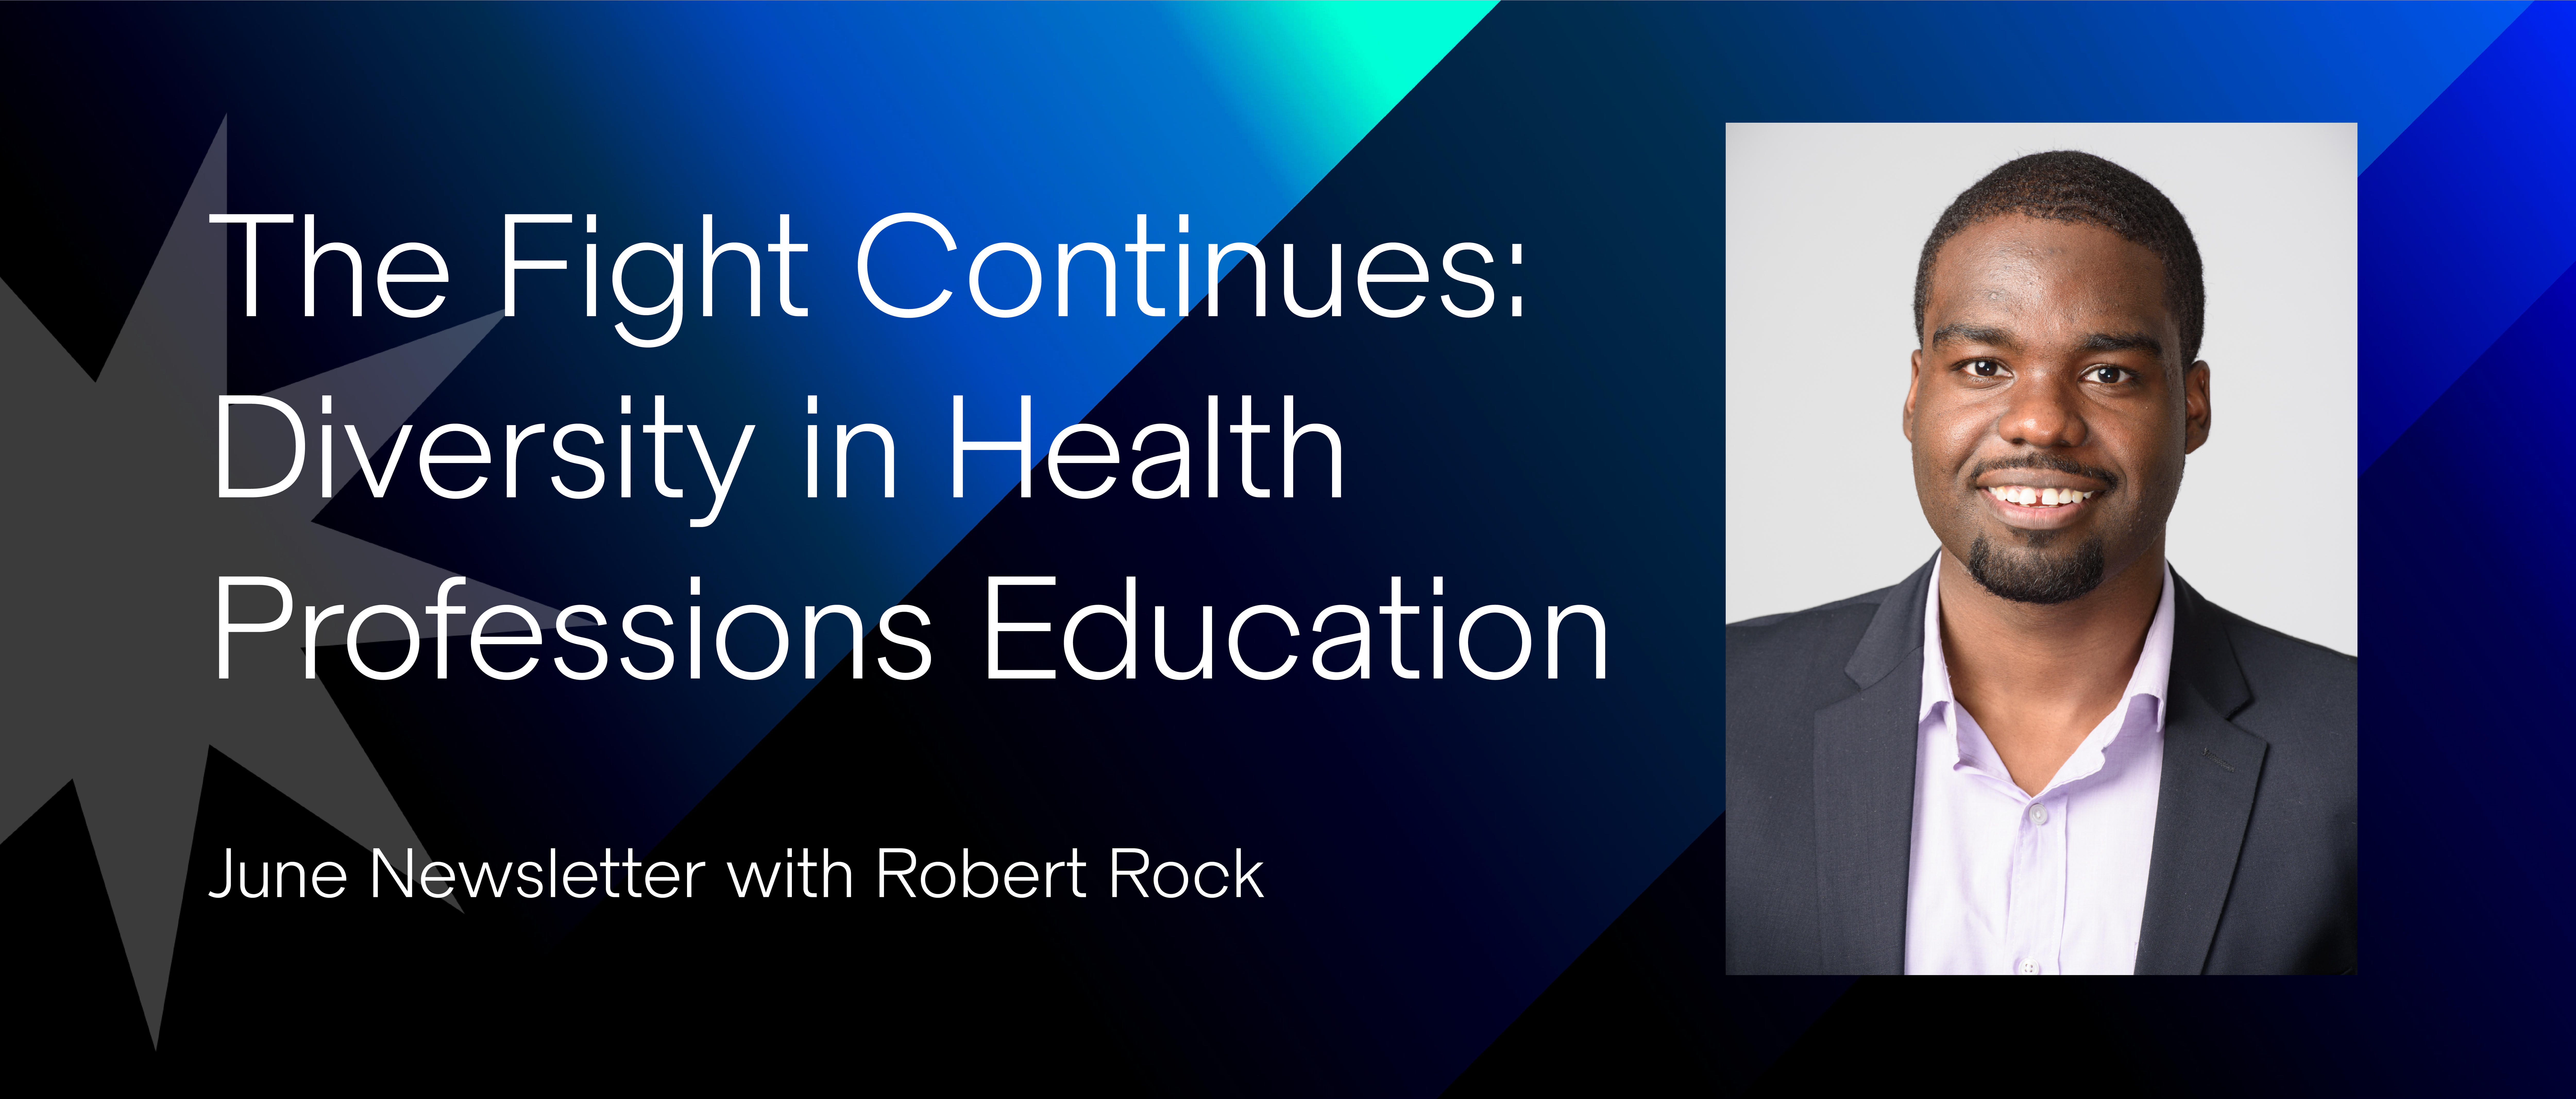 The Fight Continues: Diversity in Health Professions Education. June Newsletter with Robert Rock